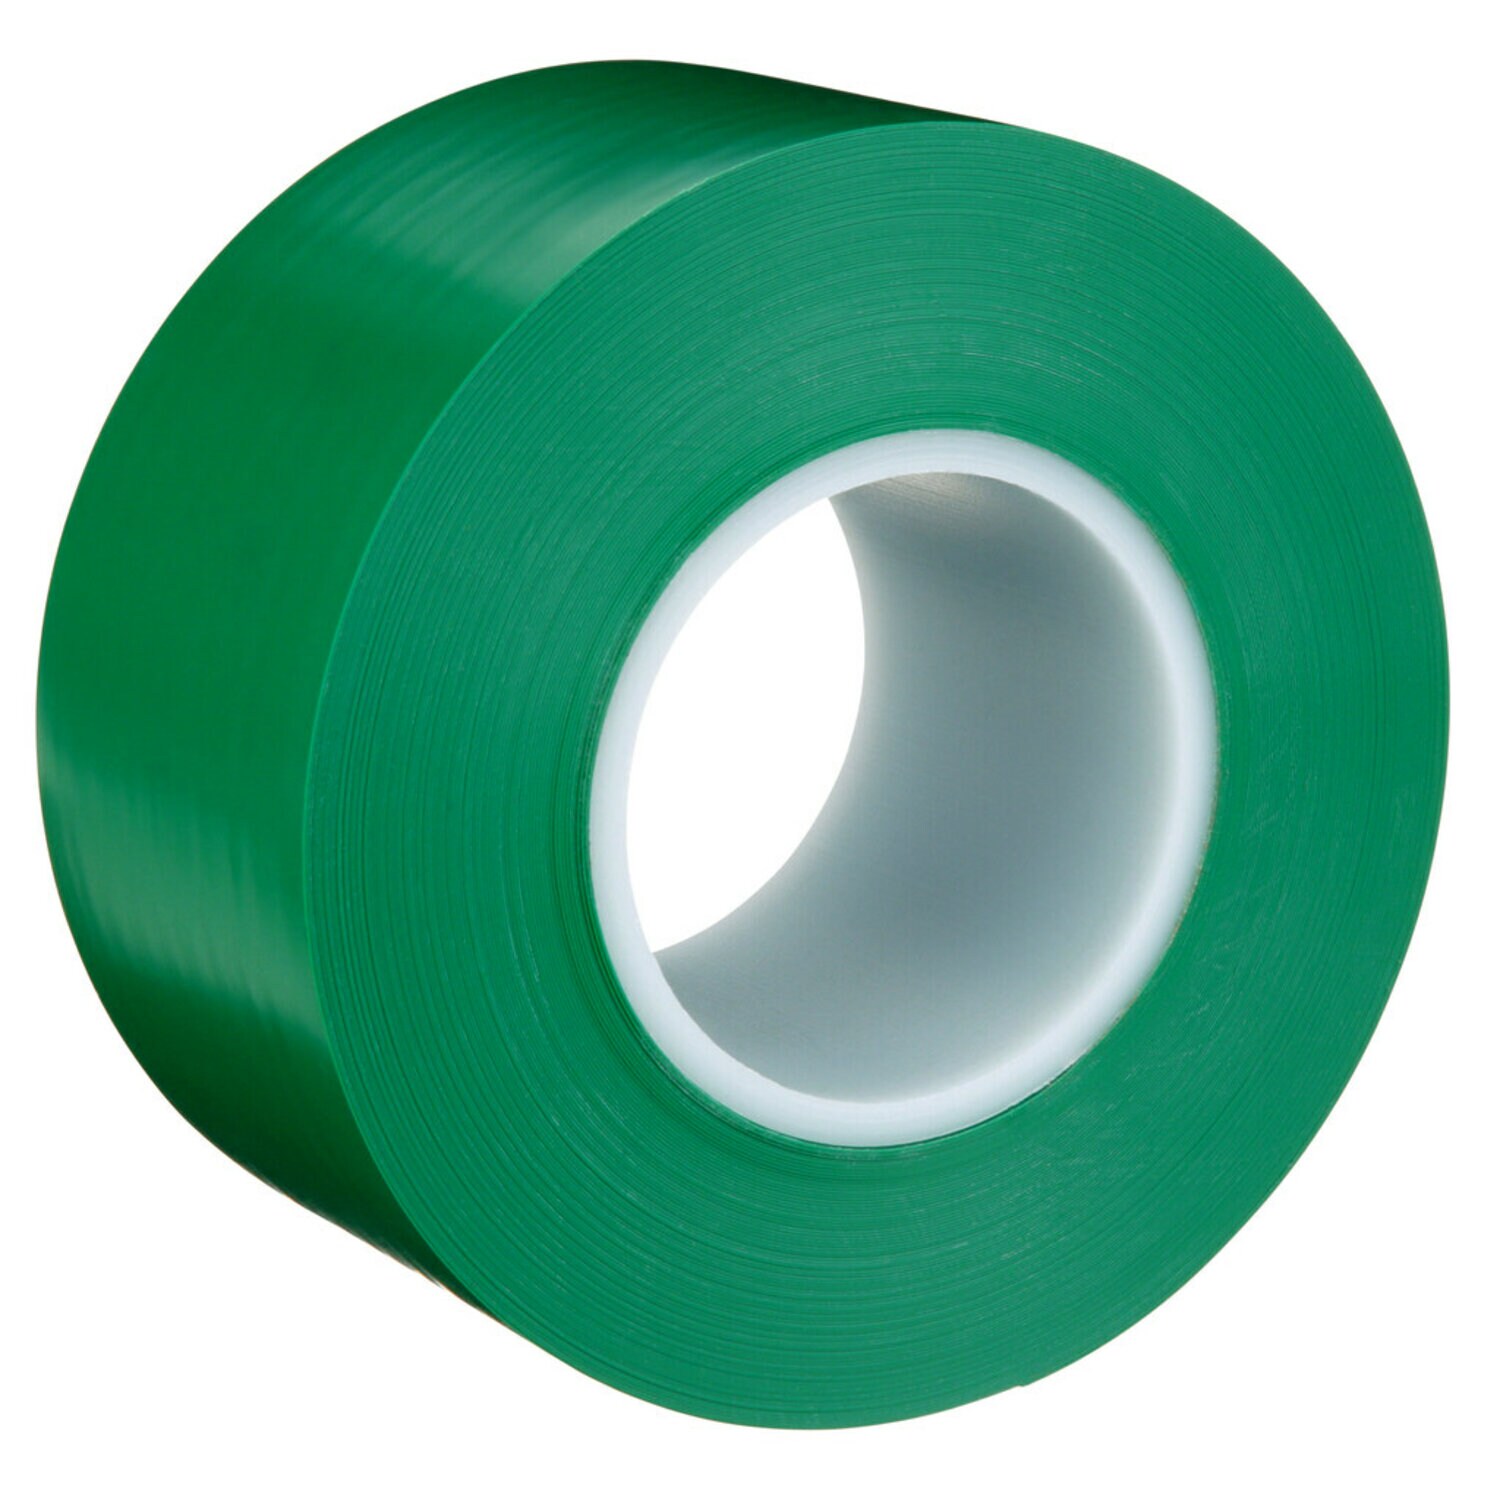 7100254037 - 3M Durable Floor Marking Tape 971, Green, 3 in x 36 yd, 17 mil, 4 Rolls/Case, Individually Wrapped Conveniently Packaged